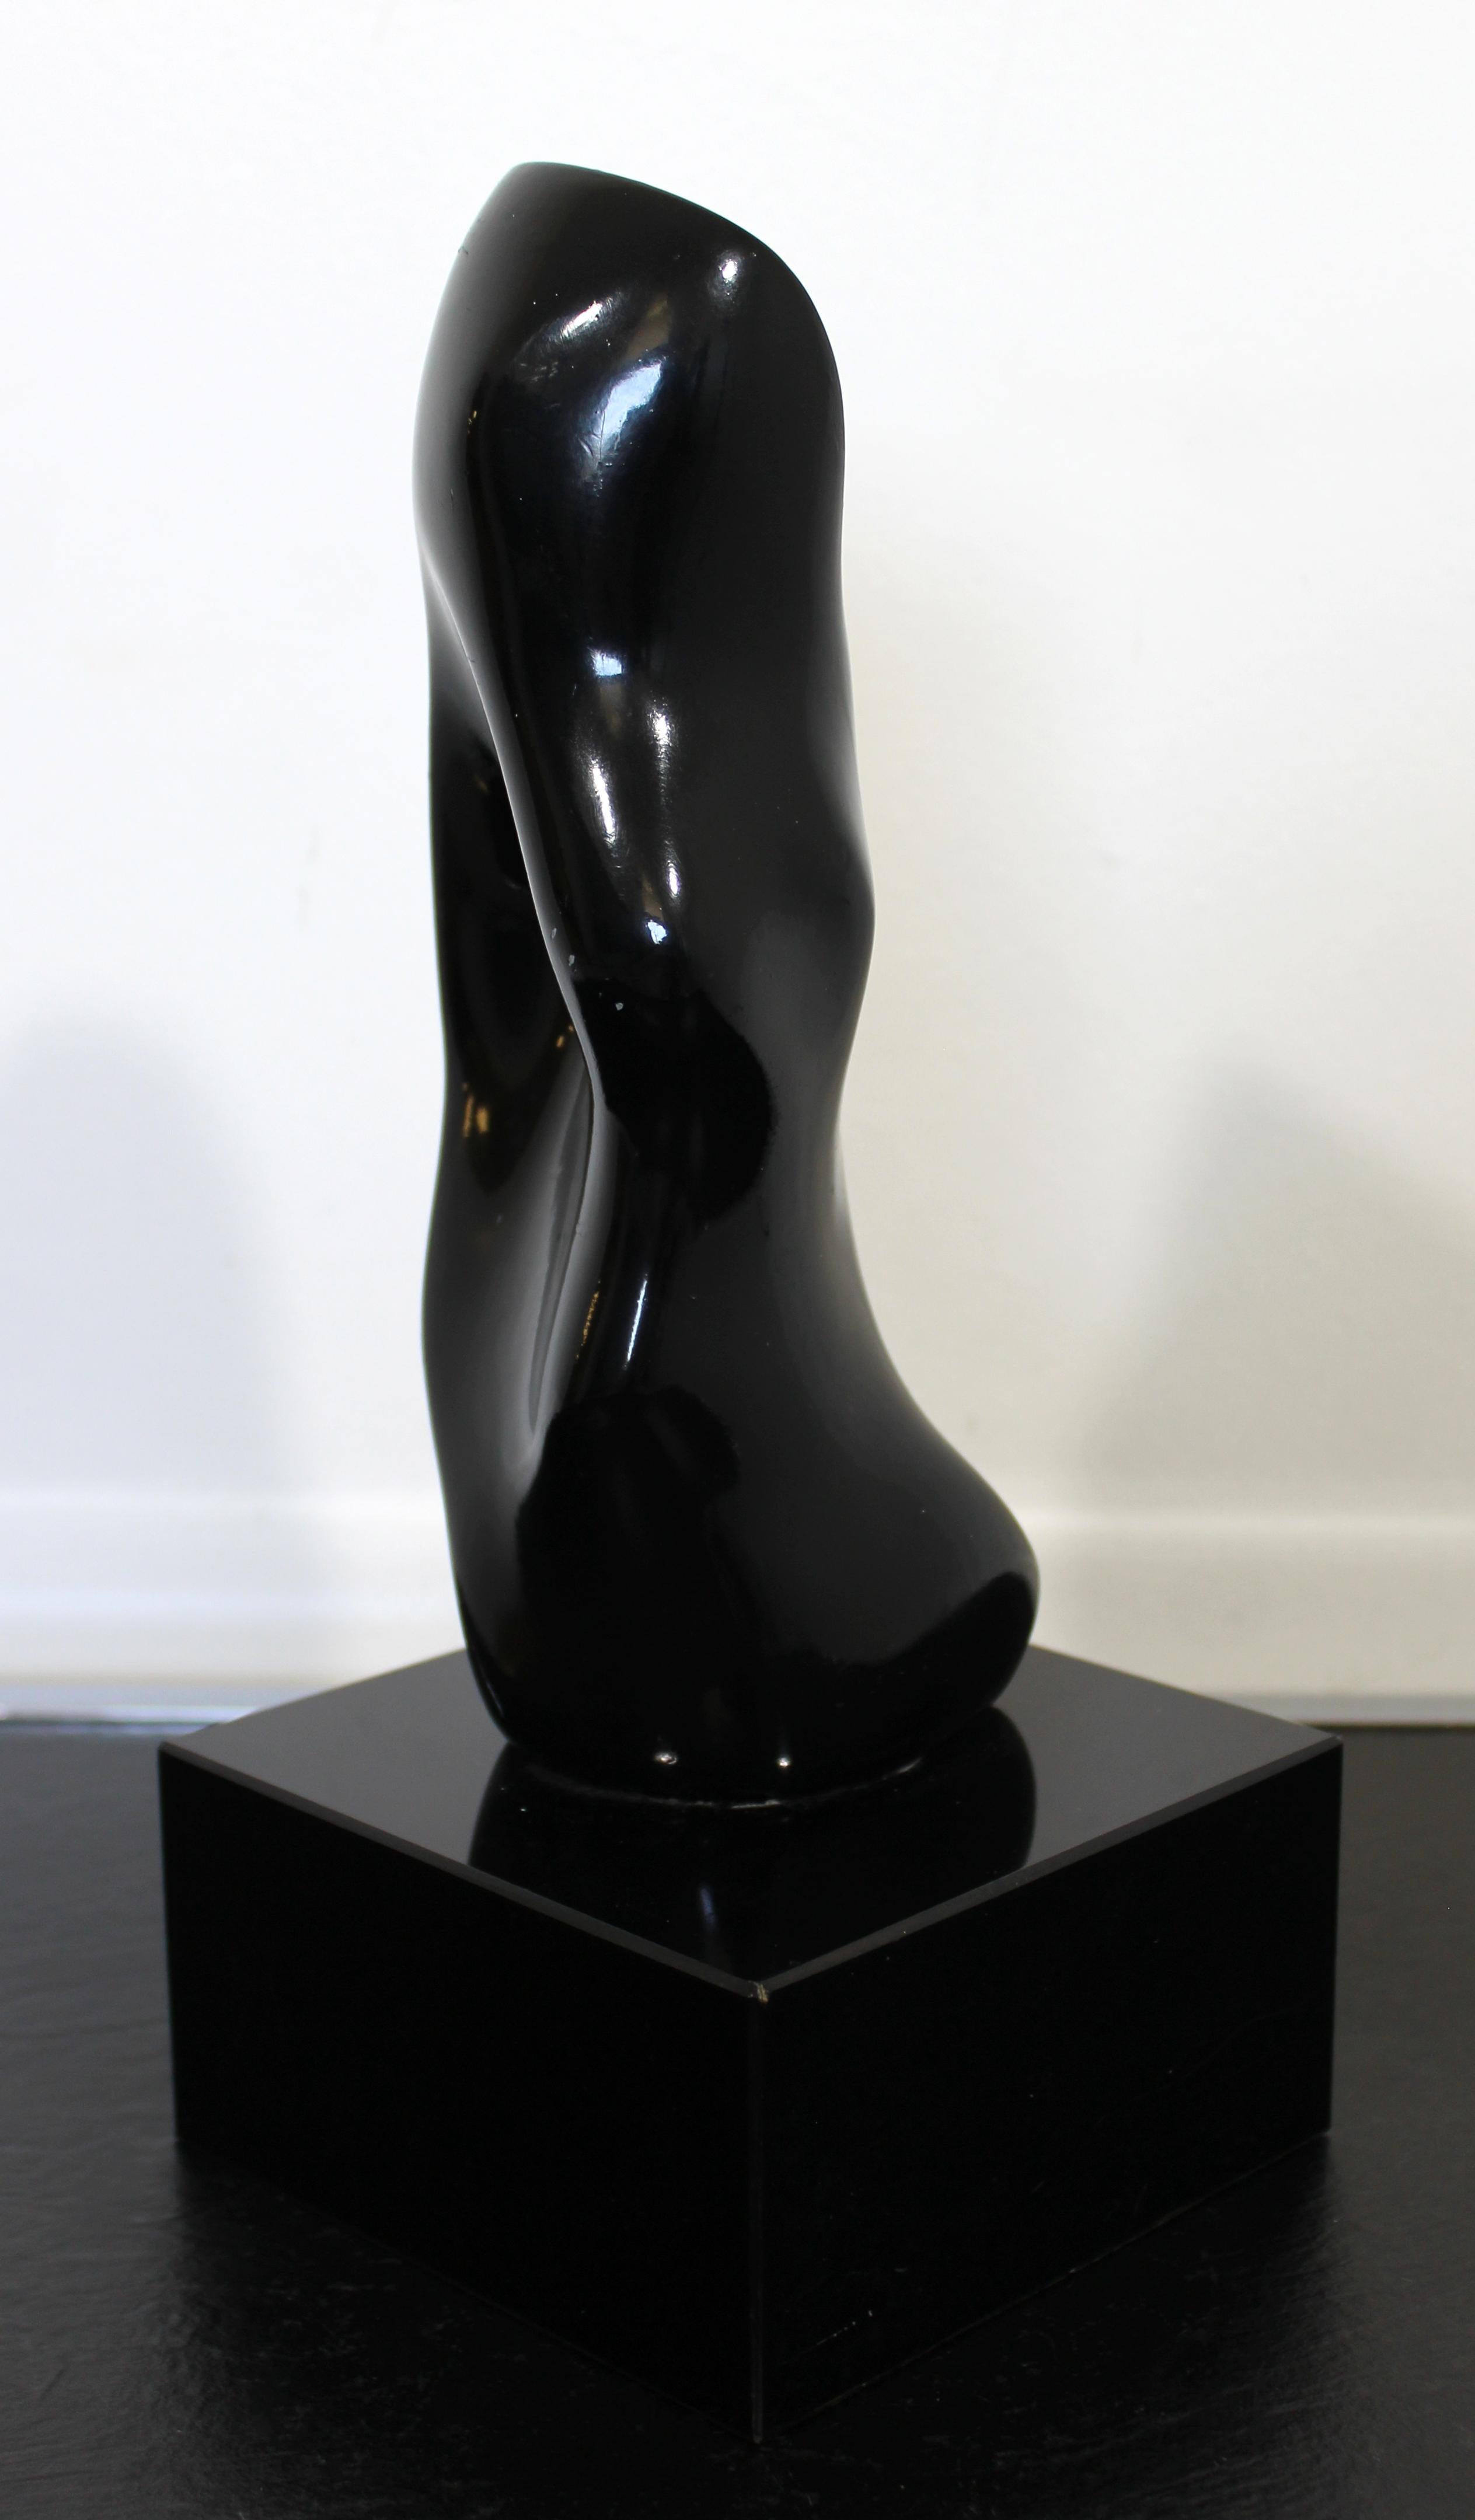 For your consideration is fantastic modern abstract black molded resin sculpture titled 